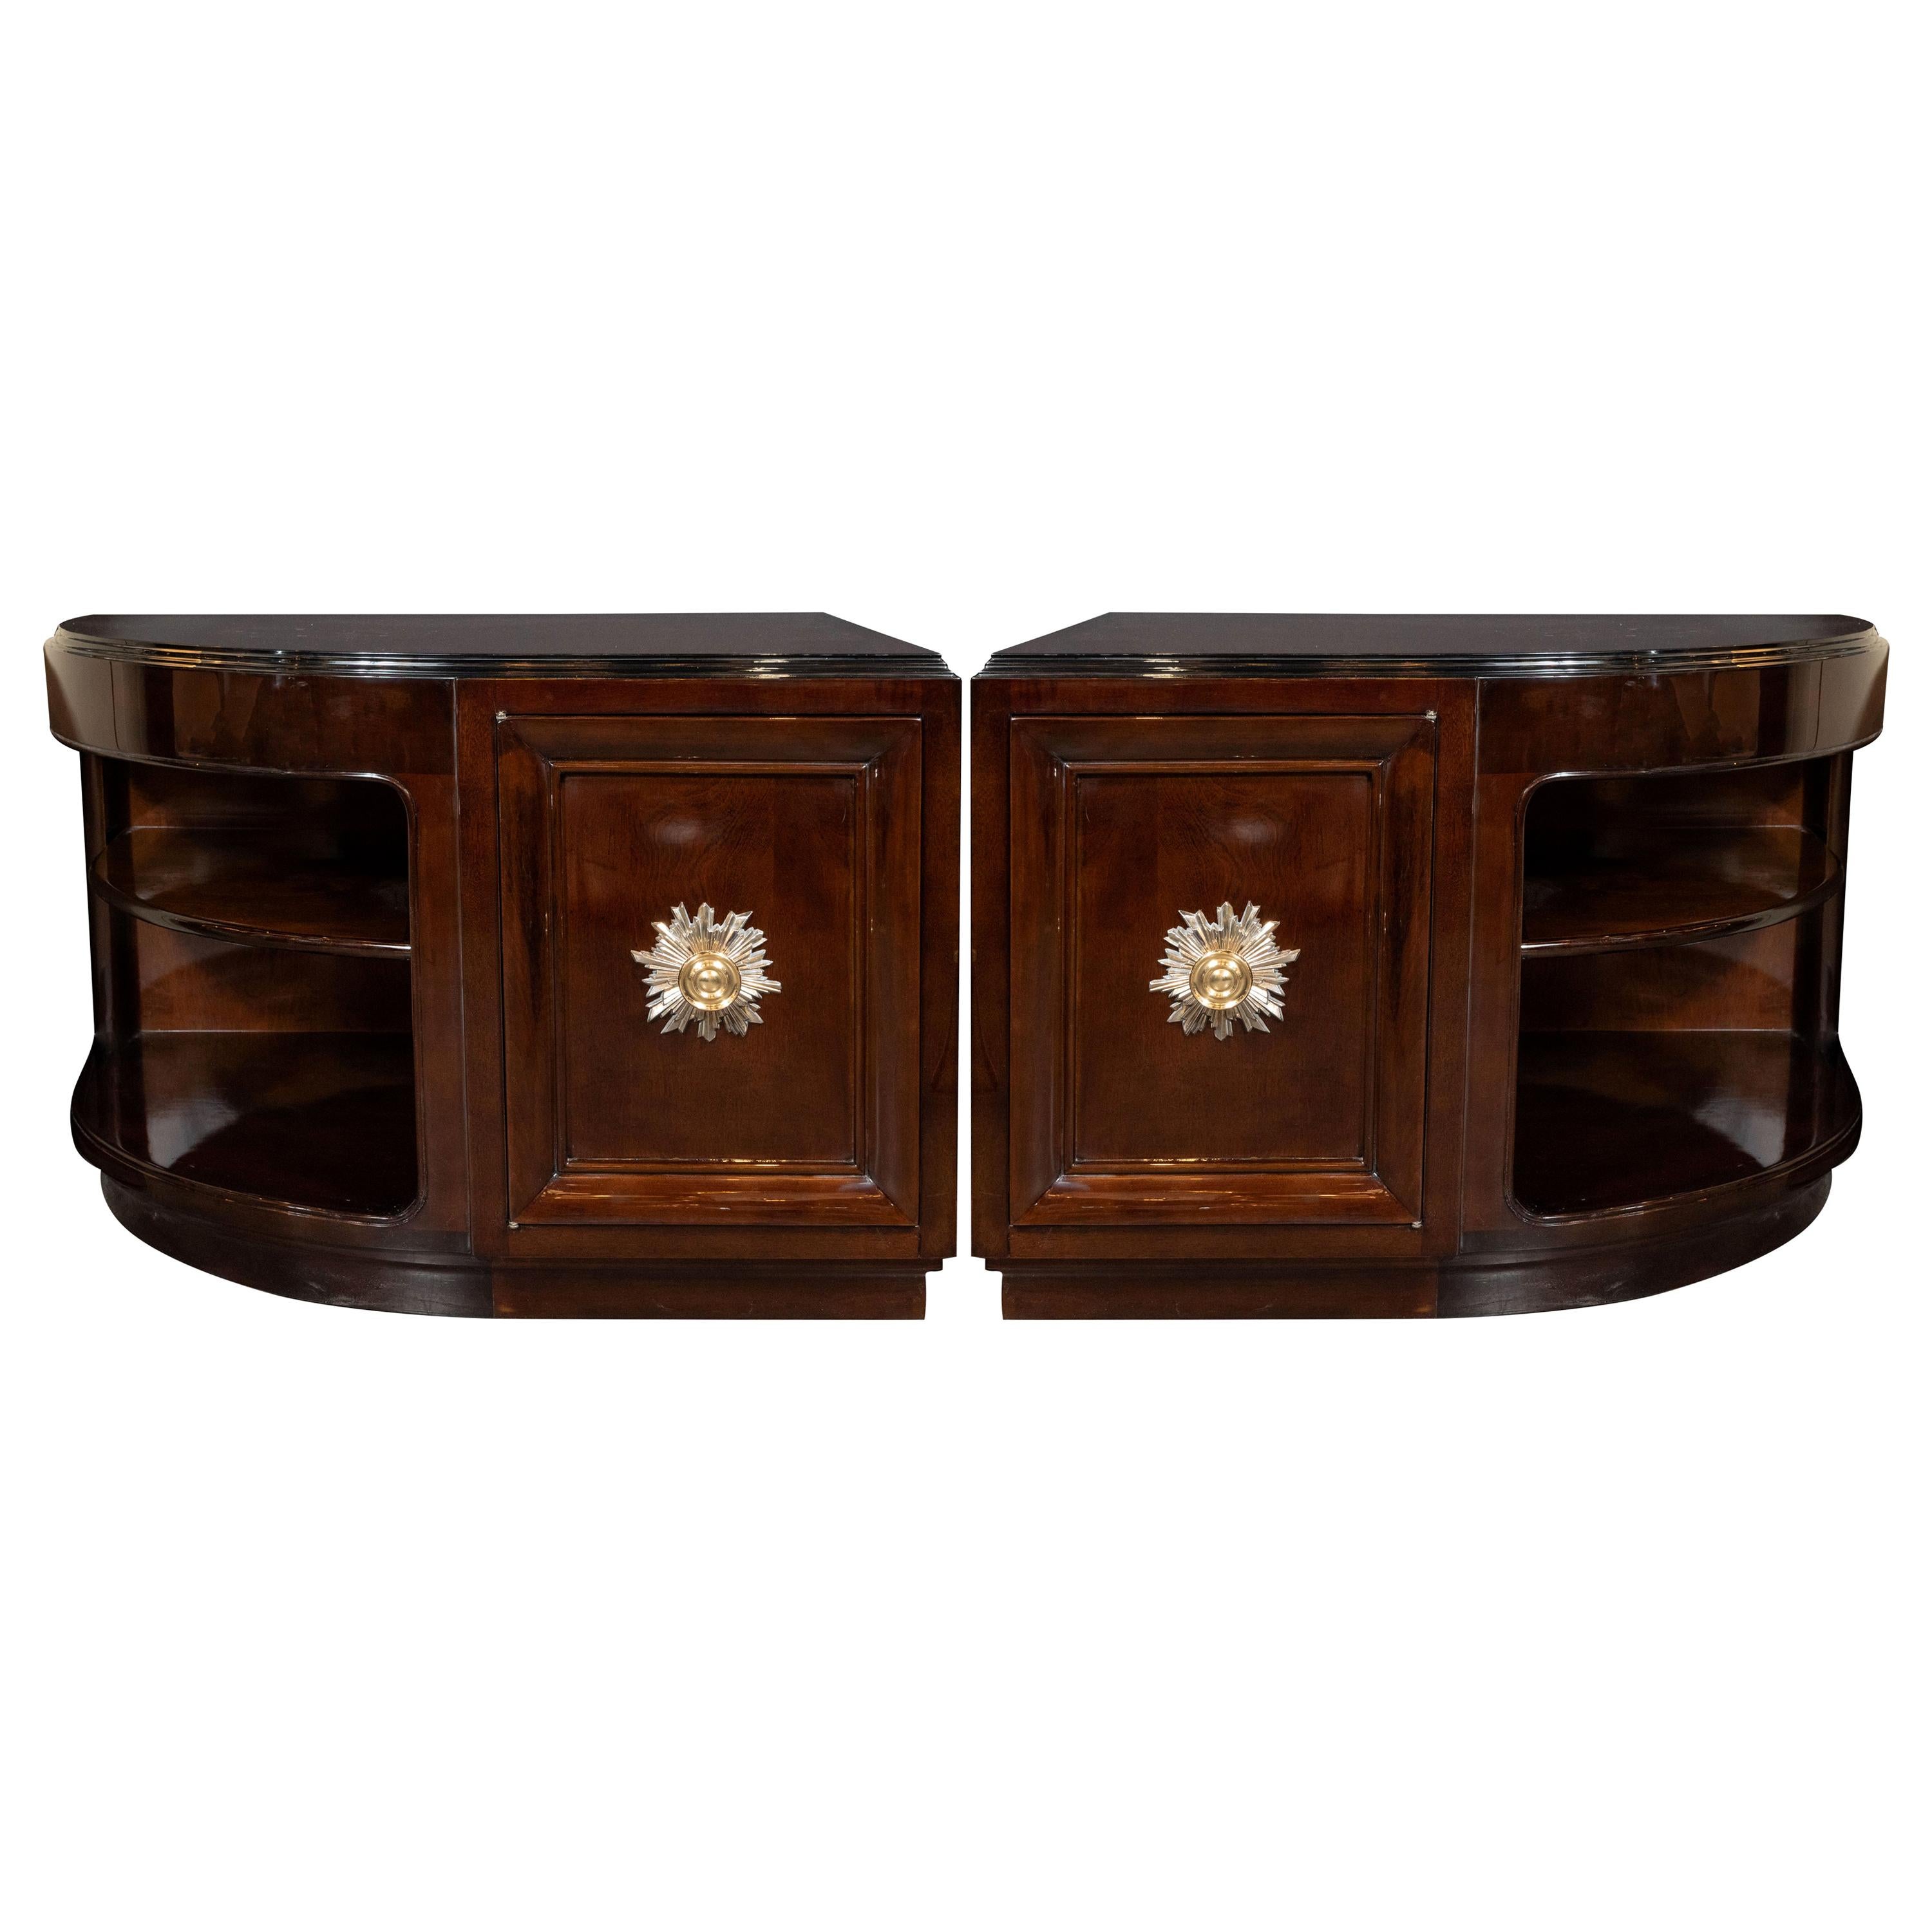 Pair of Art Deco Walnut End Tables/Nightstands with Gilded Pulls, Grosfeld House